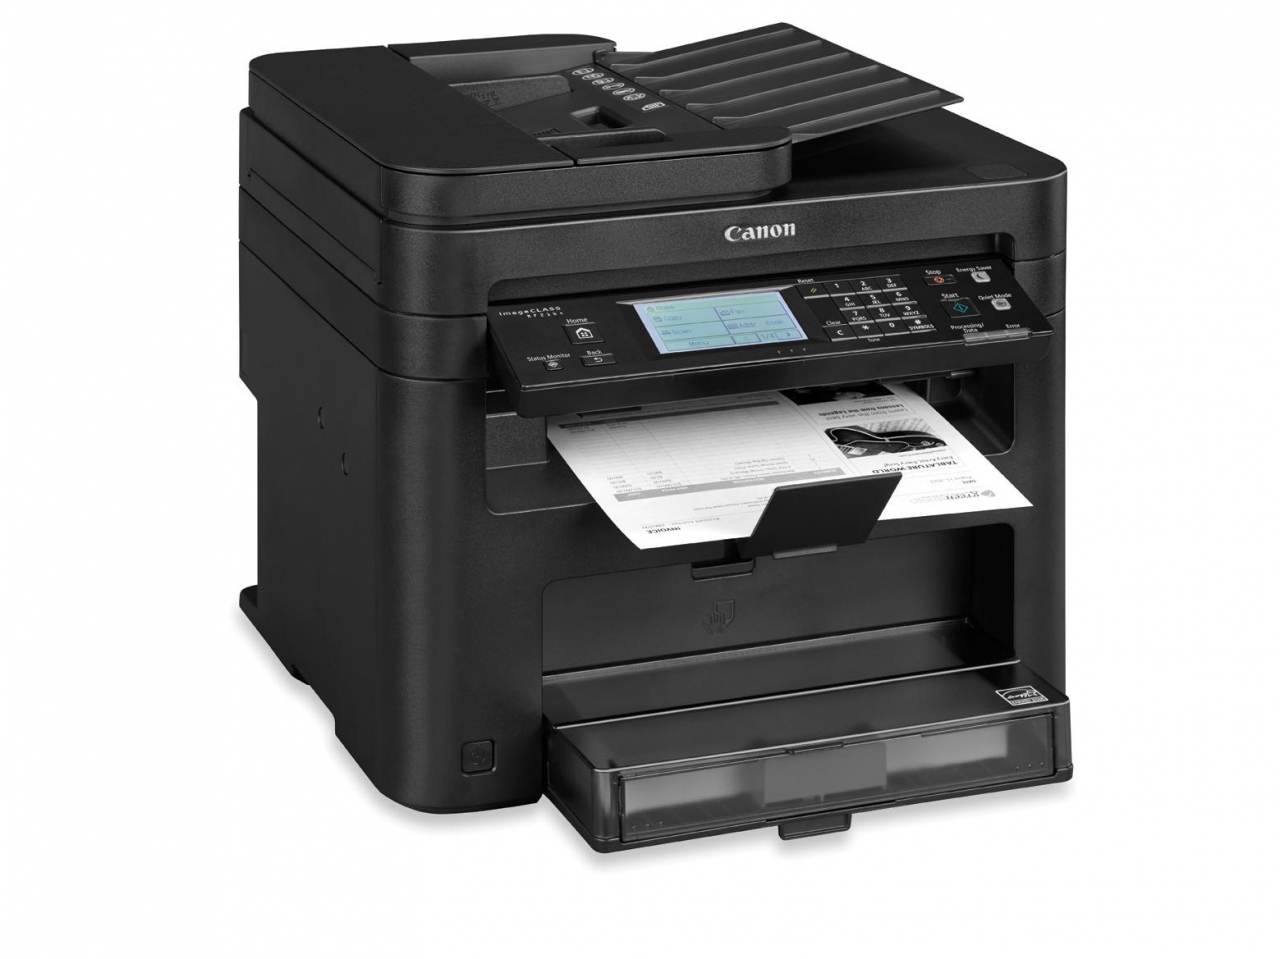 Canon imageCLASS MF216n All-in-One Laser AirPrint Copier Scanner Fax - iClarified